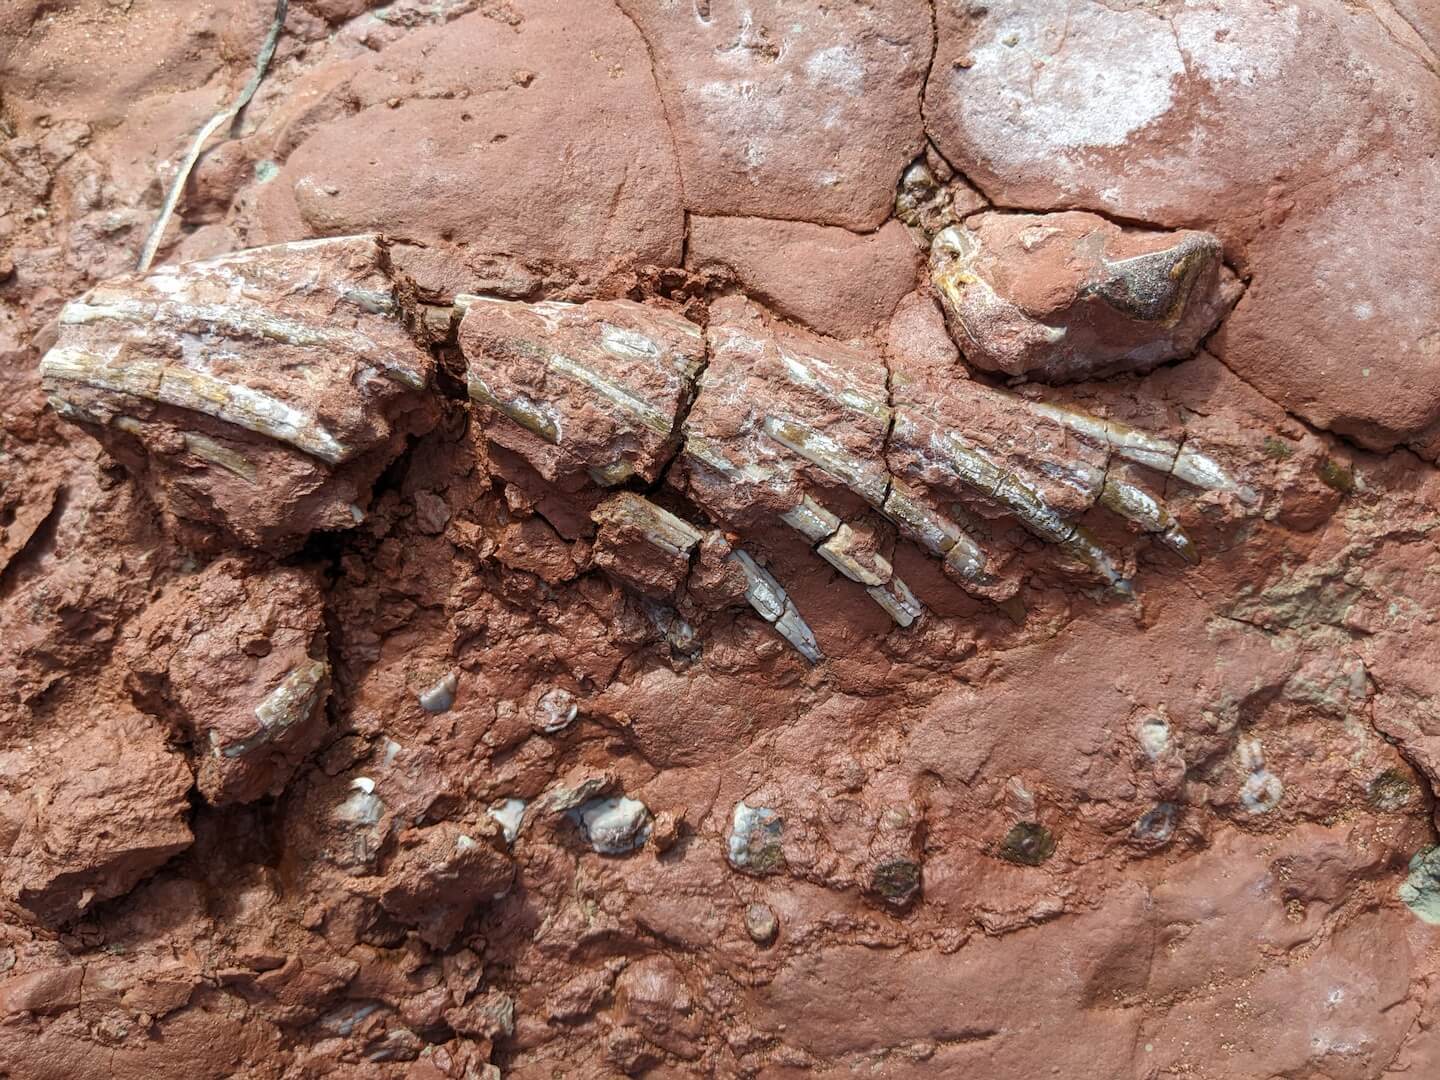 Canadian Schoolteacher Discovers a Fossil That May Be 300 Million Years Old 1